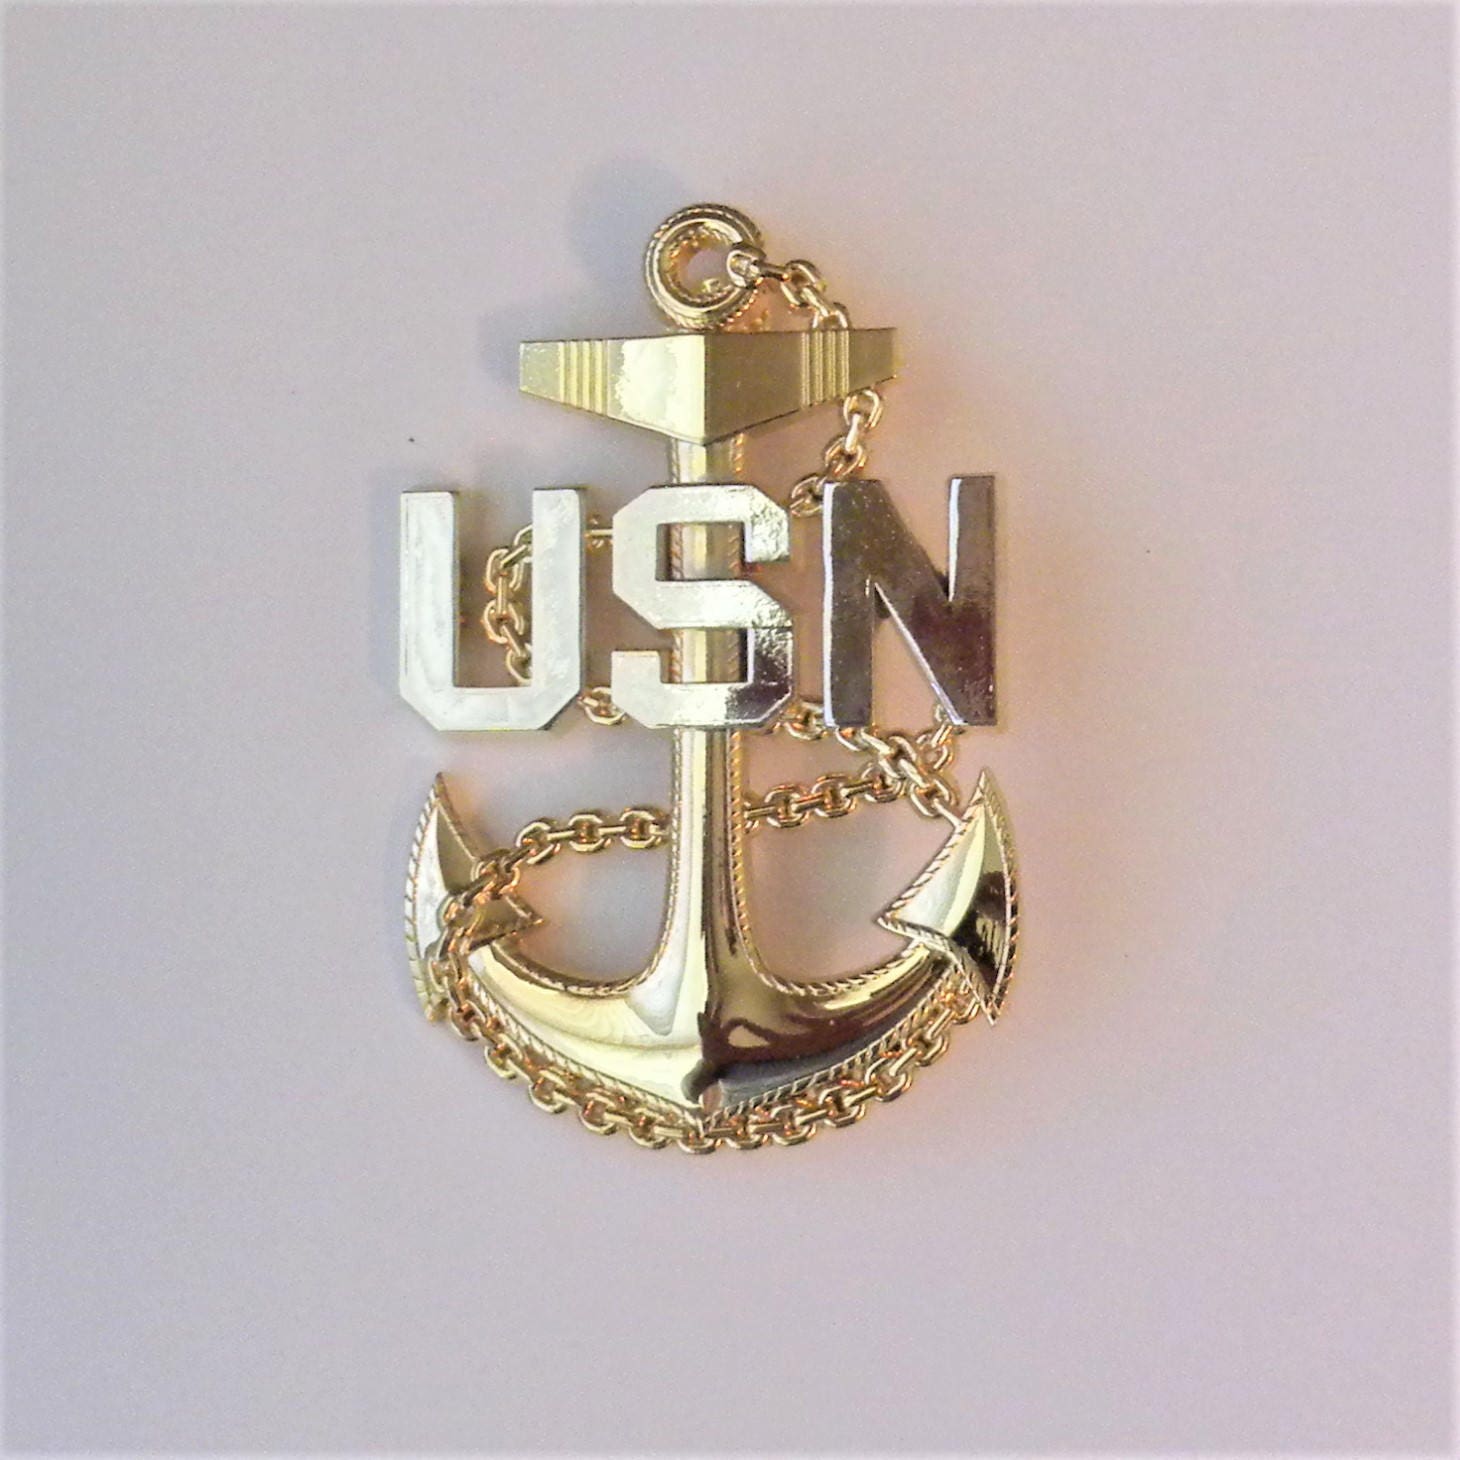 Navy Petty Officer First Class Gold Pin 3.25 Inch 